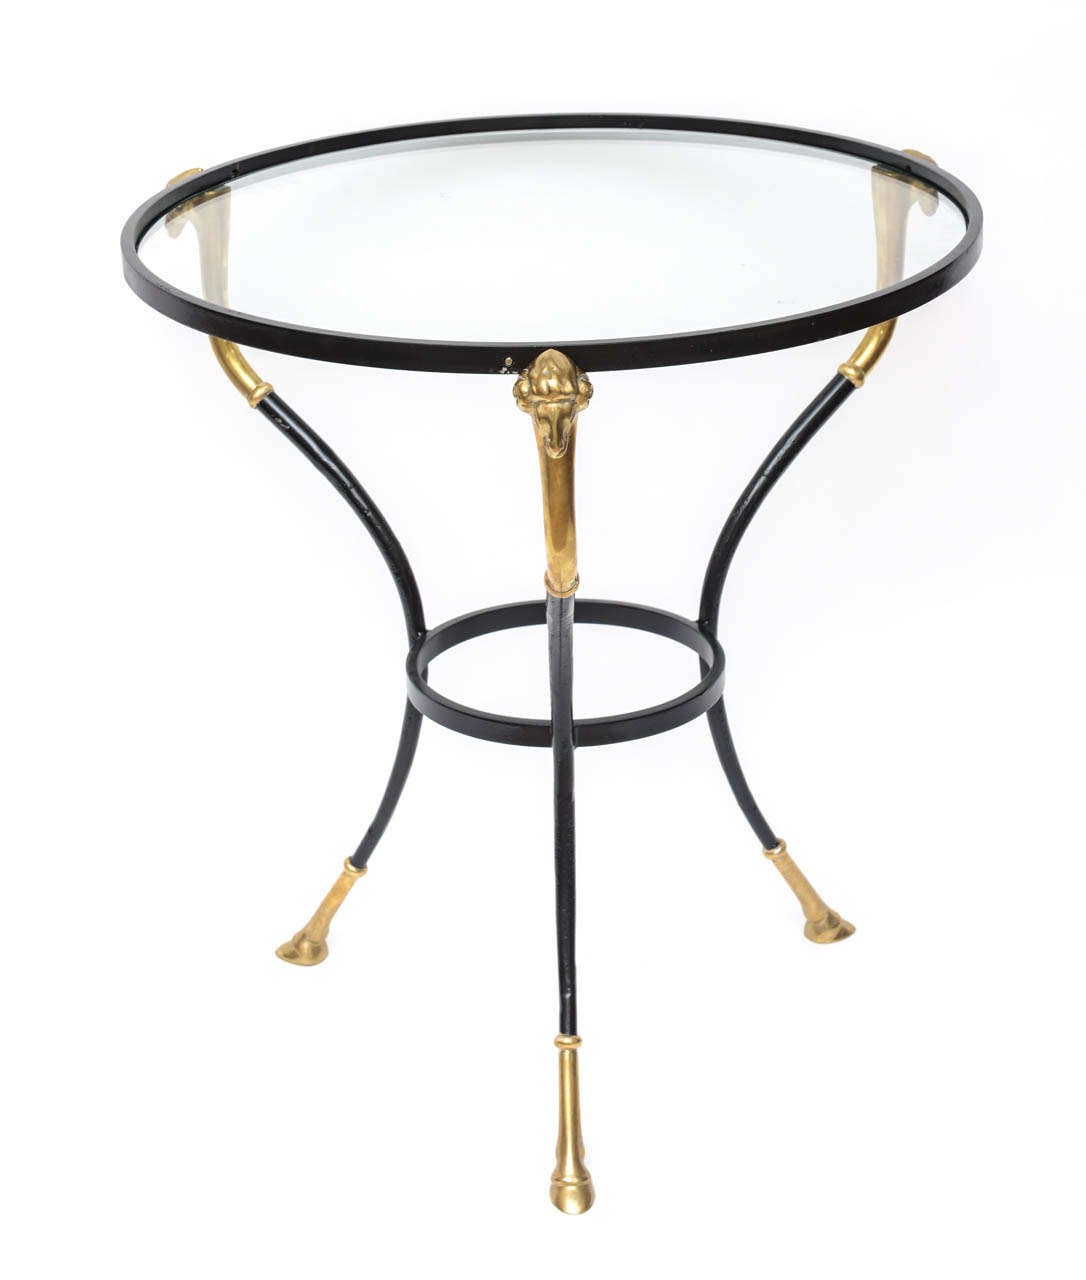 Italian cocktail or side table in iron with brass sabots in the form of ram's hoofs.
Tabletop is upheld with three ram's heads in brass. Tabletop surface is glass and sits loose on the base.
In good vintage condition with some scuffs to the black